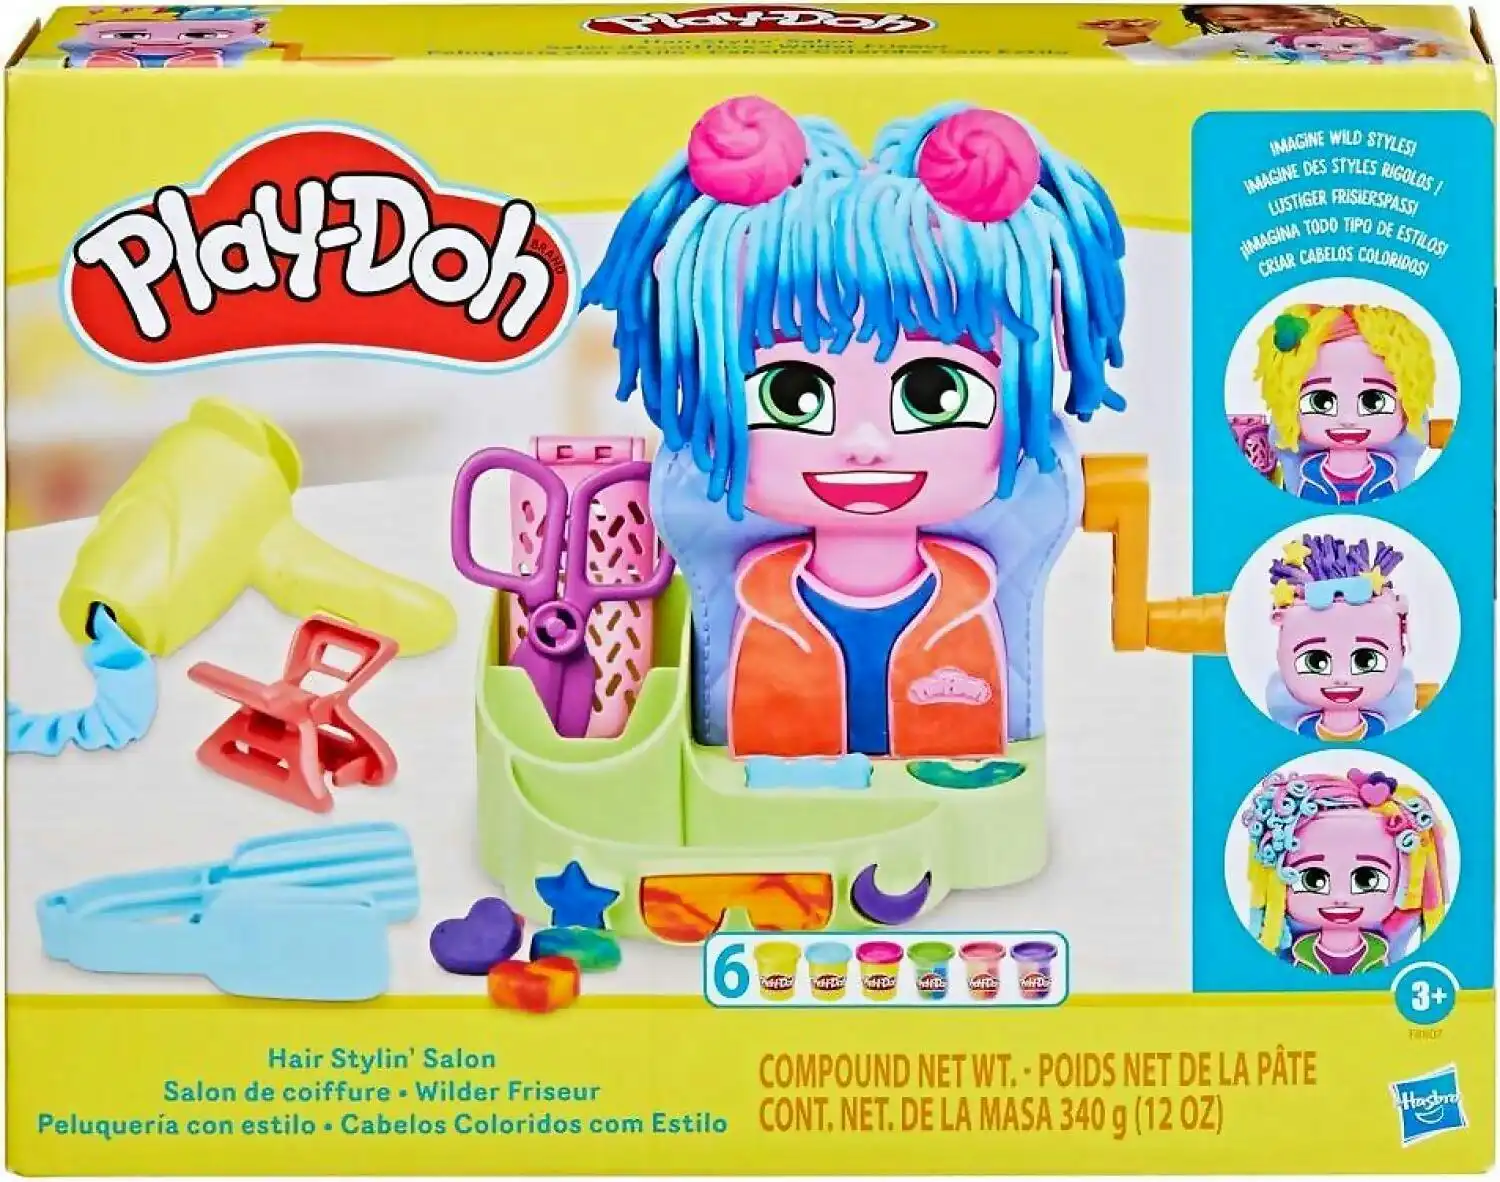 Play-doh - Hair Stylin Salon Playset Pretend Play Toy Set For Kids Ages 3+